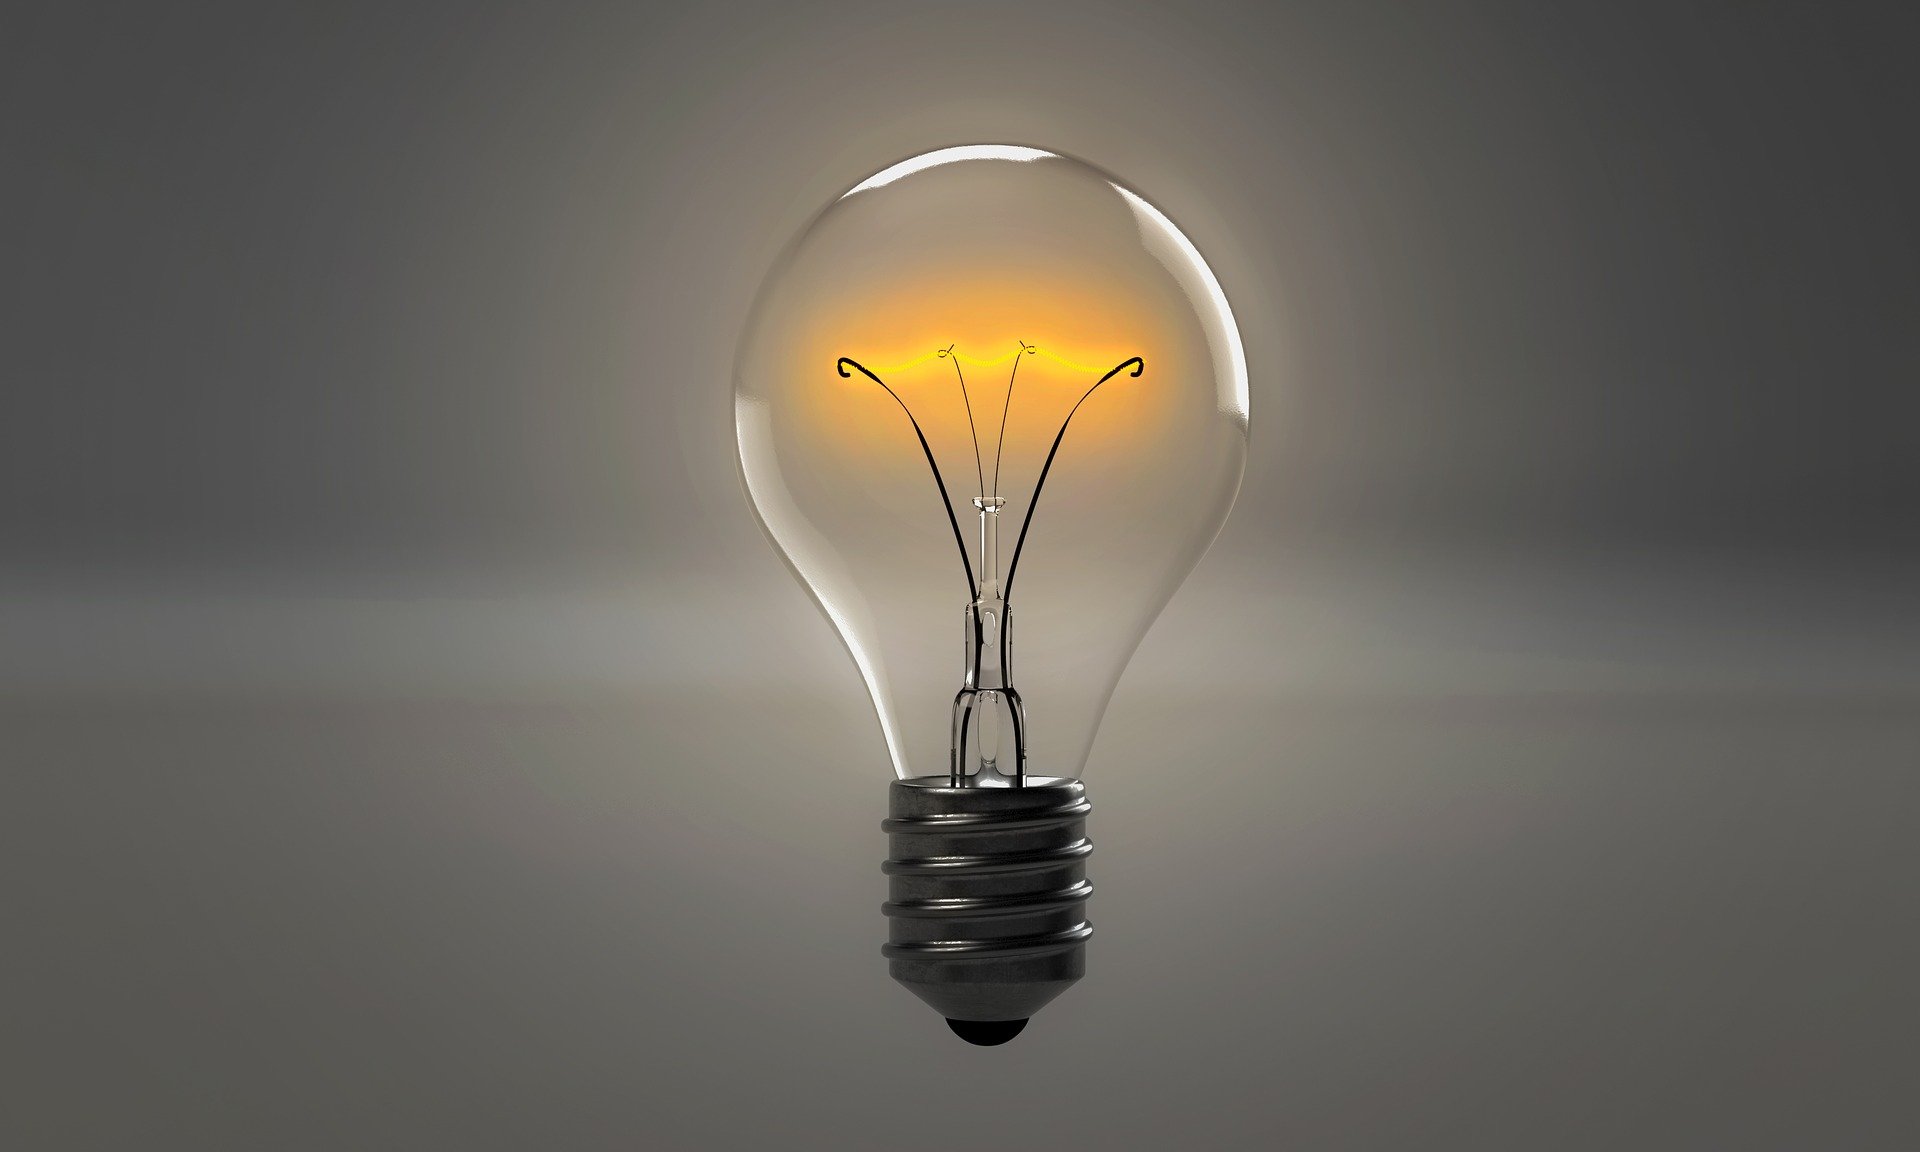 History of the First | the Lightbulb?